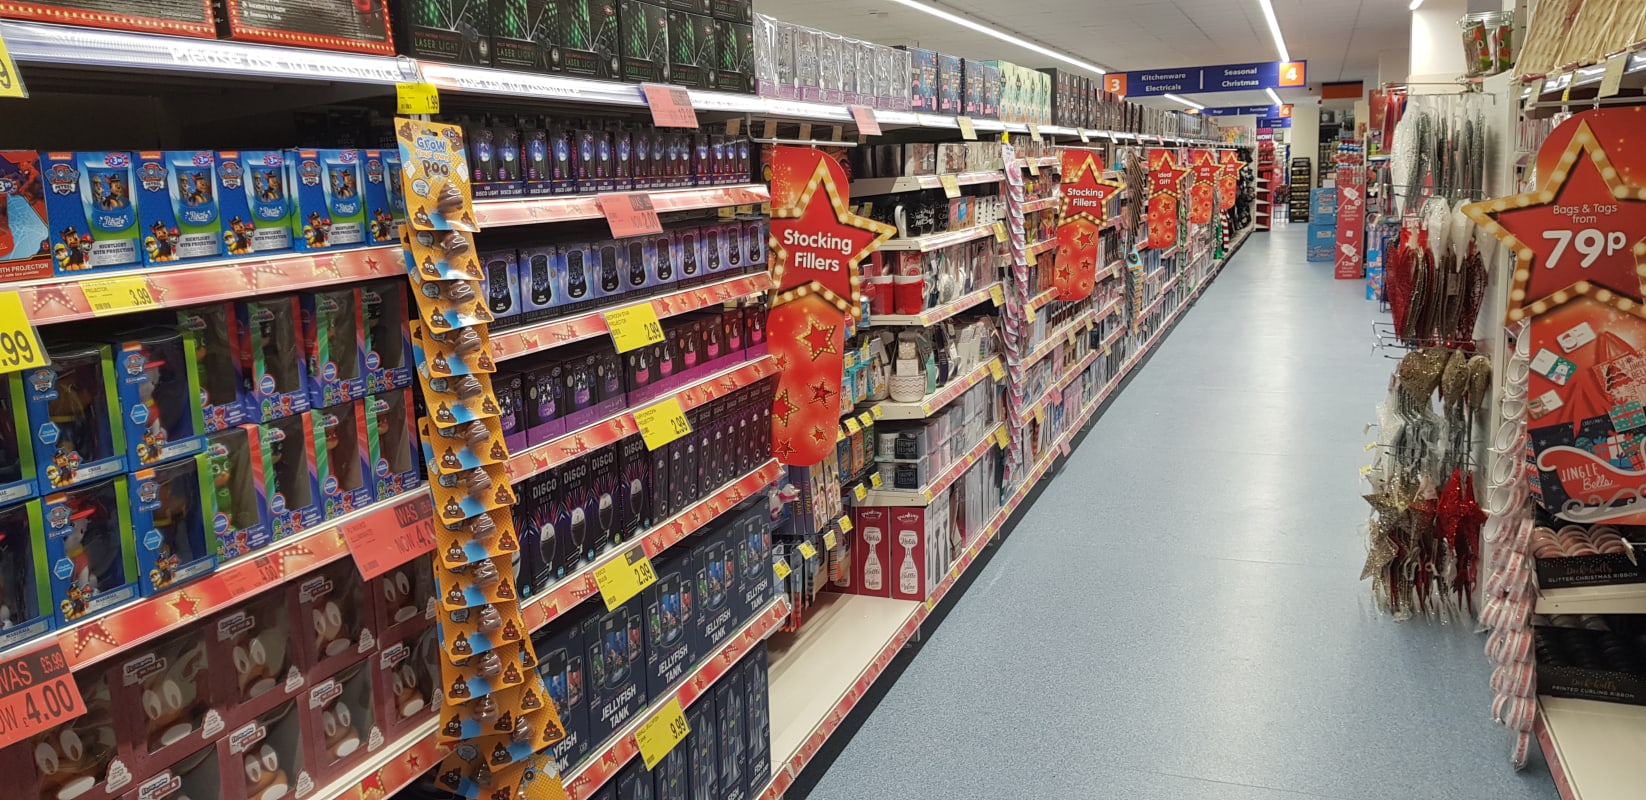 B&M's new store in Weston-super-Mare stocks a sparkling range of Christmas decorations, lights and trees.